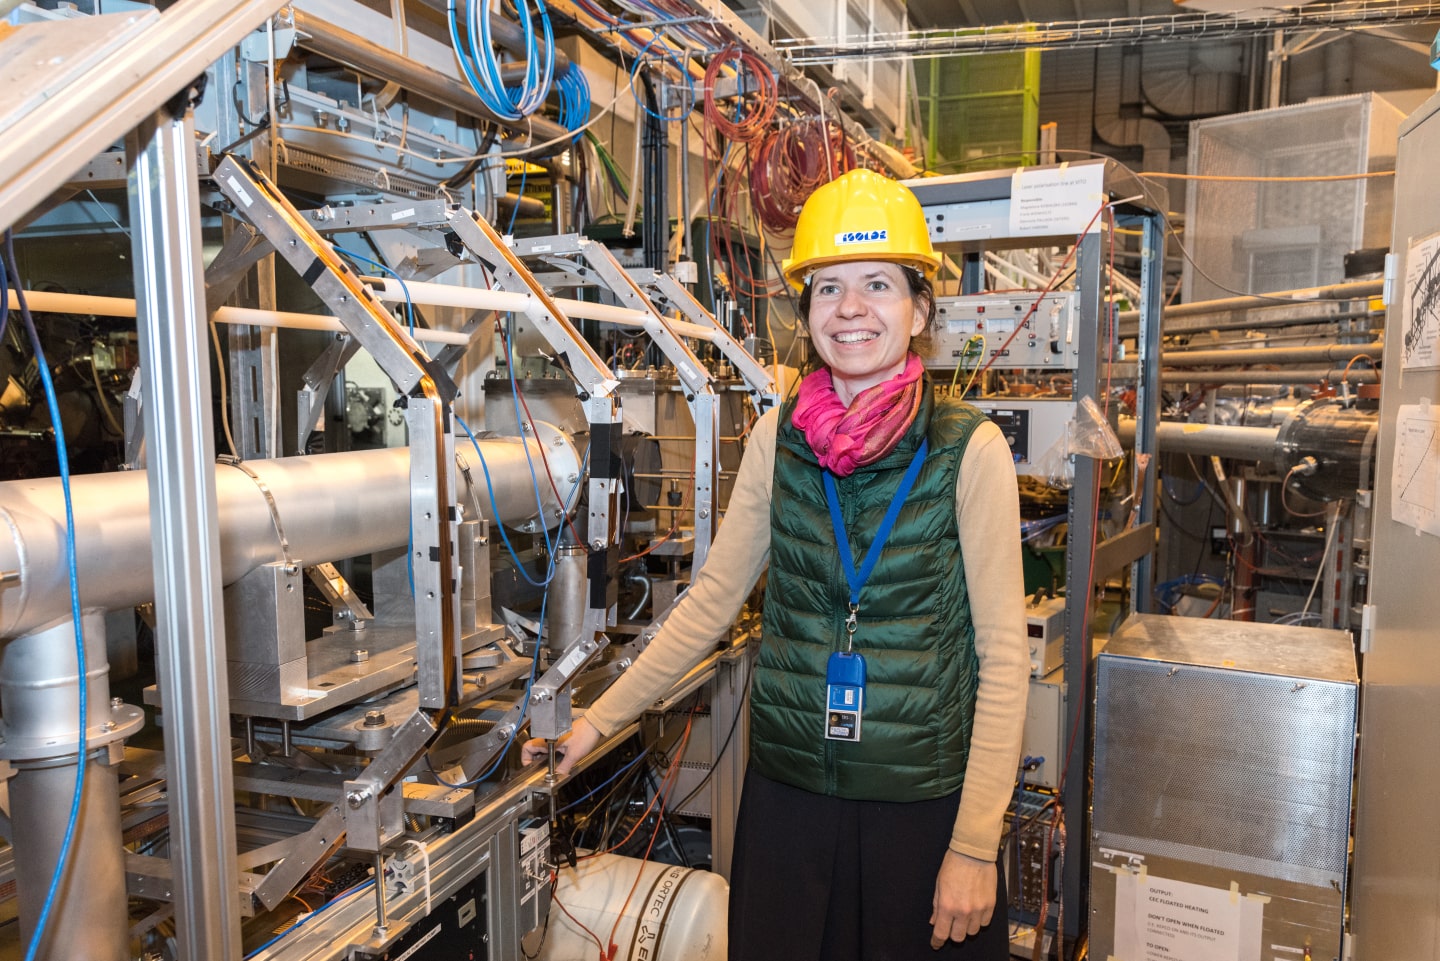 ISOLDE researcher Magdalena Kowalska is leading the study into DNA molecules using isotopes. (Image: Sophia Bennett/CERN)